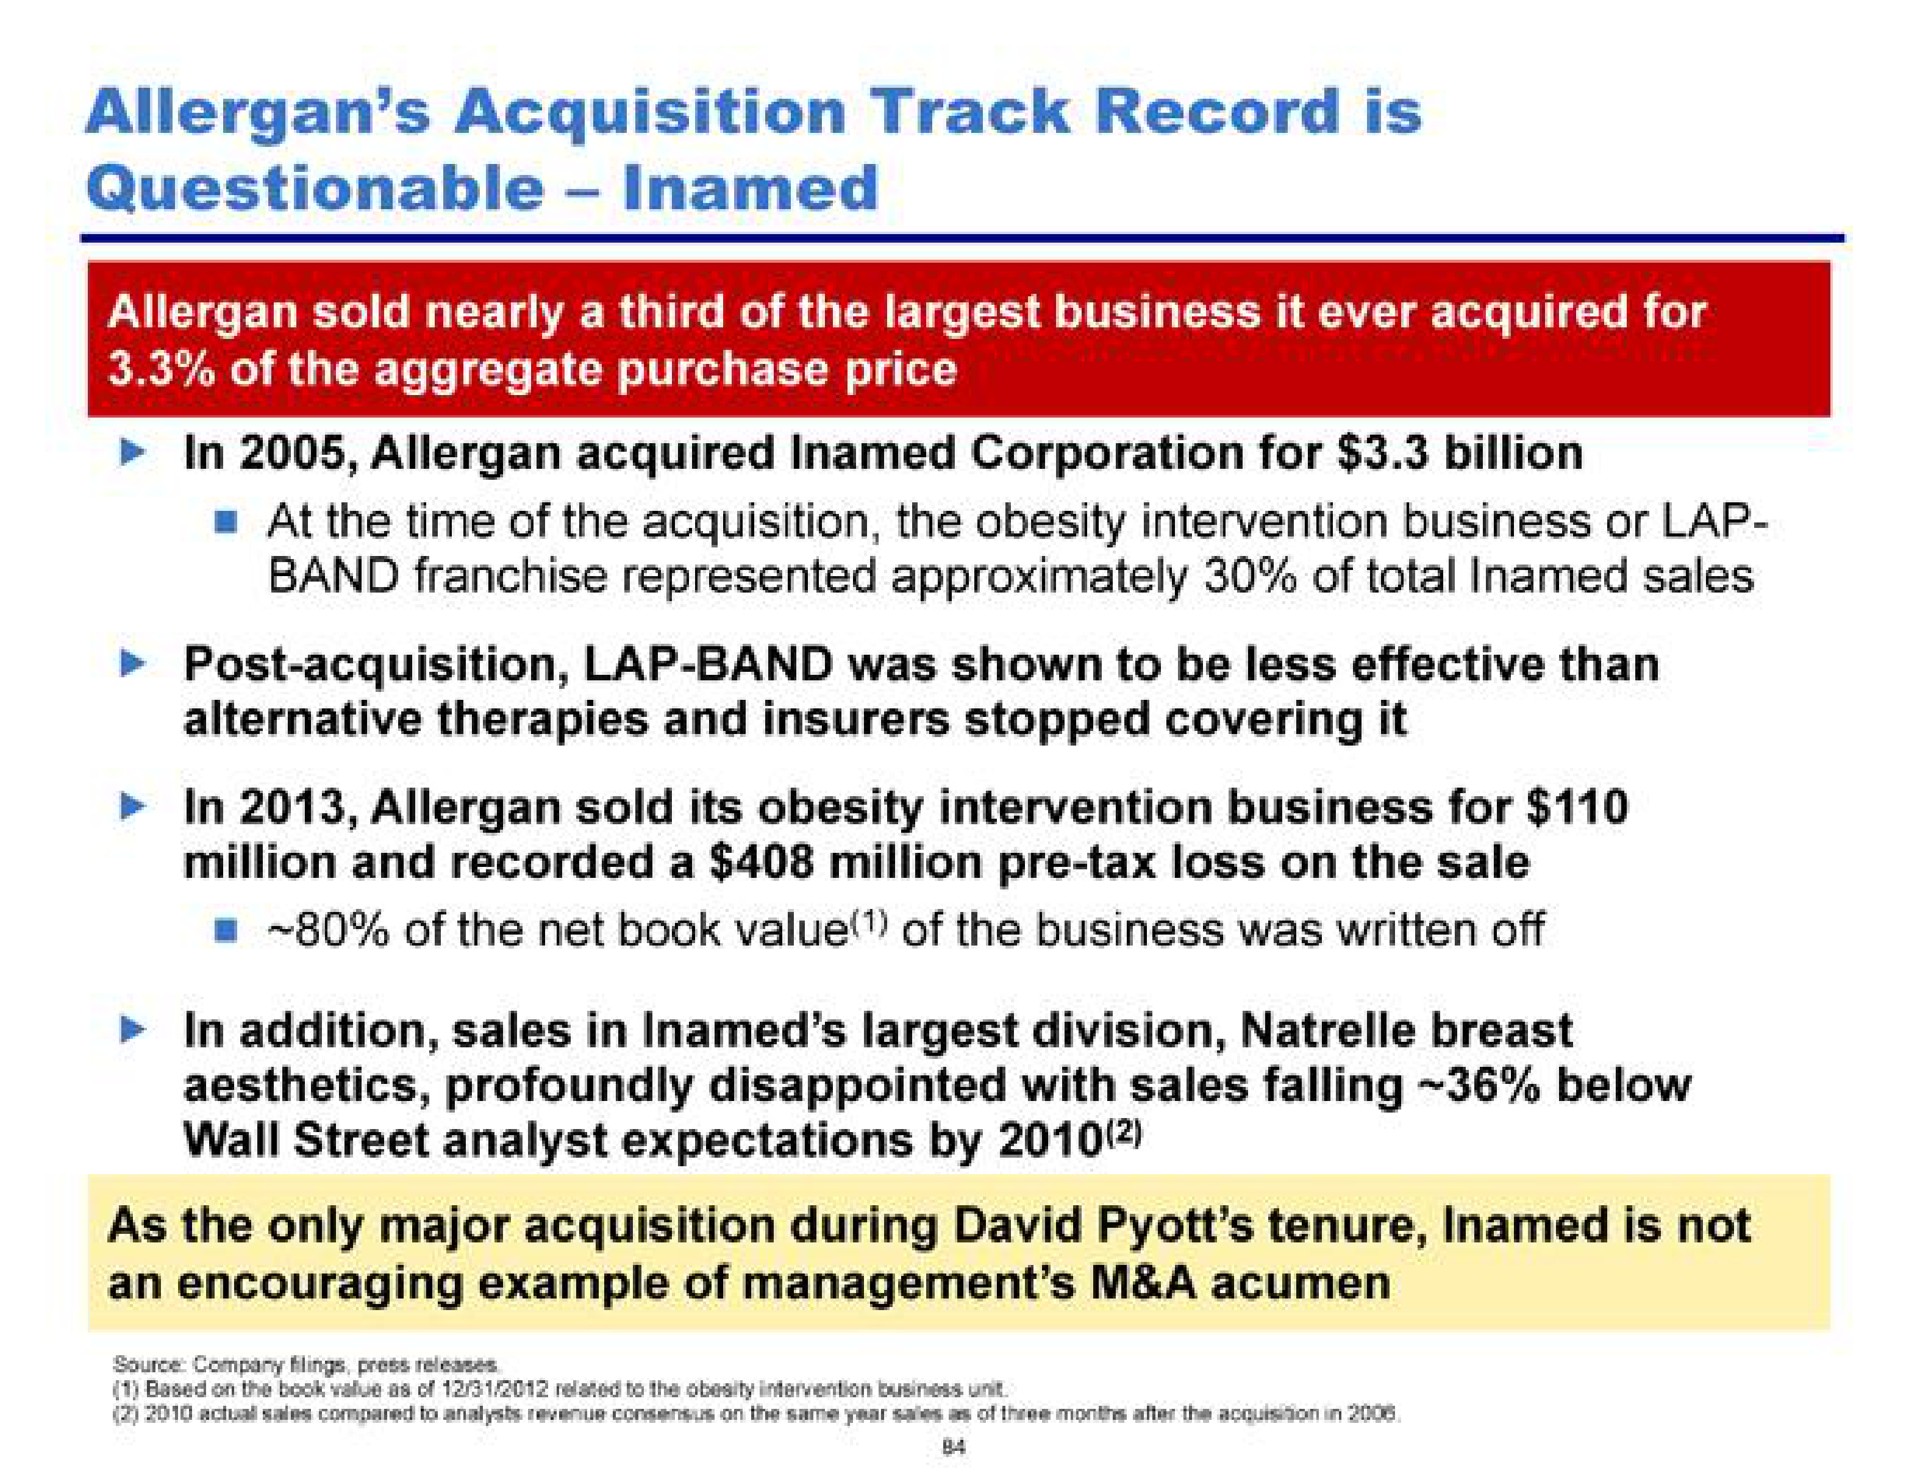 acquisition track record is questionable | Pershing Square